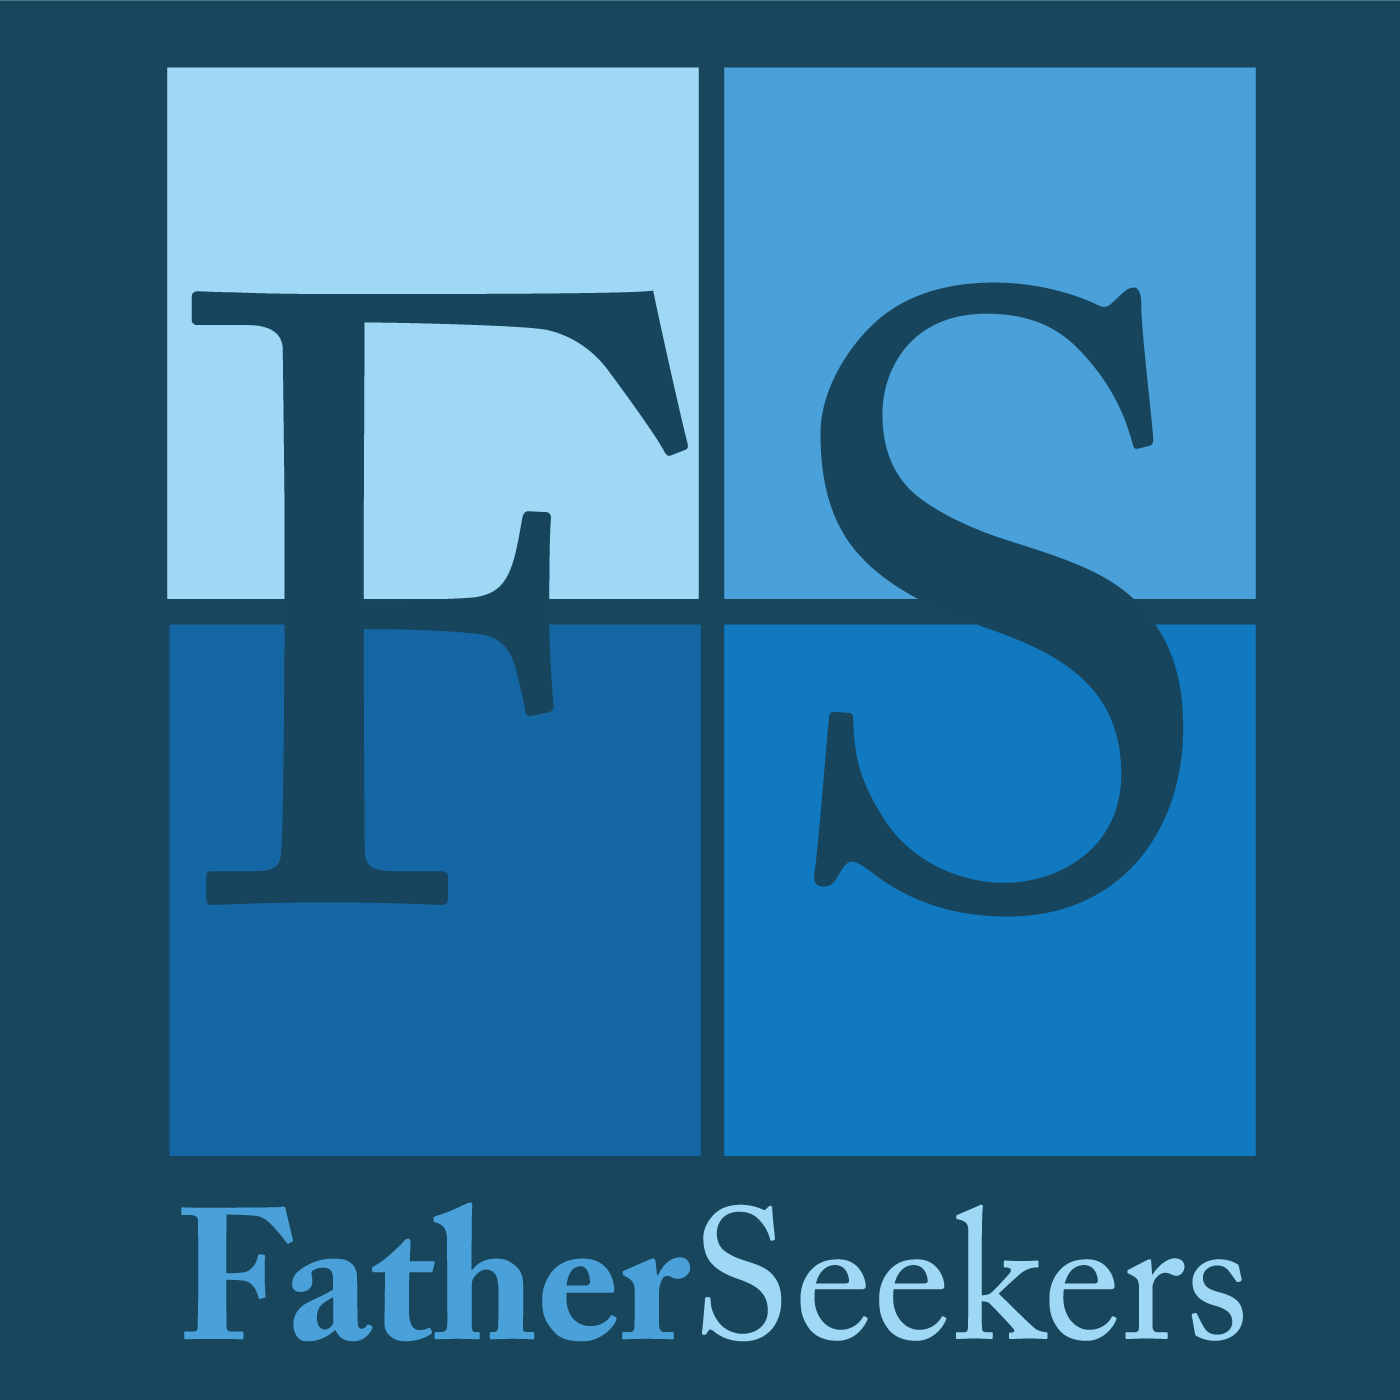 Artwork for FatherSeekers